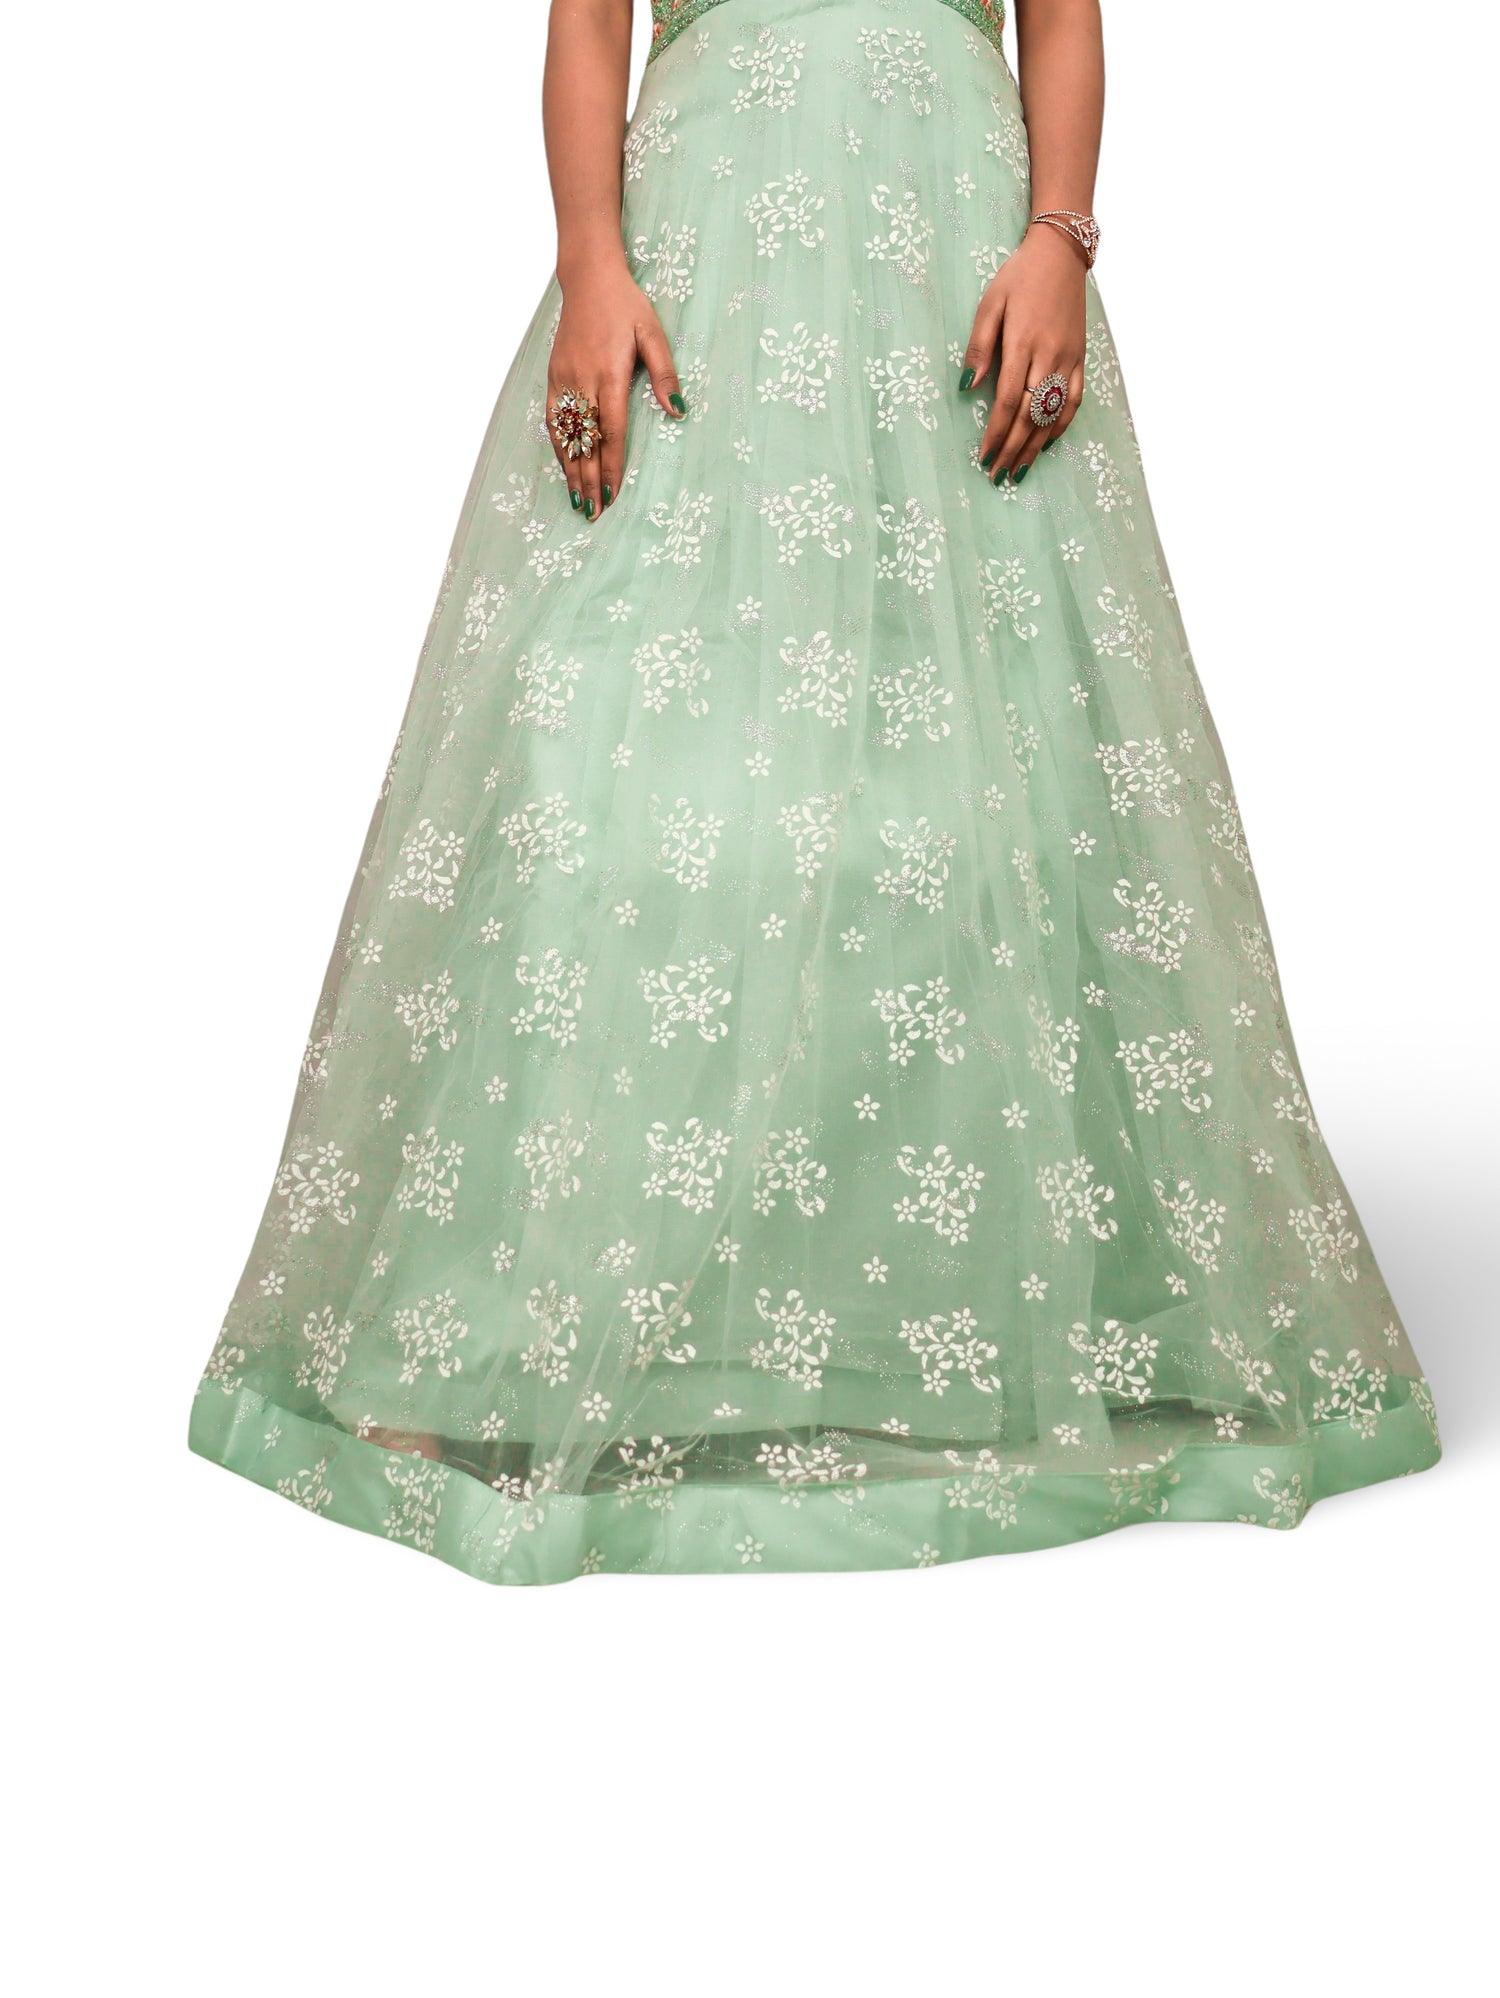 Gown with Stone Work &amp; Embroidery by Shreekama Pista Green Designer Gowns for Party Festival Wedding Occasion in Noida